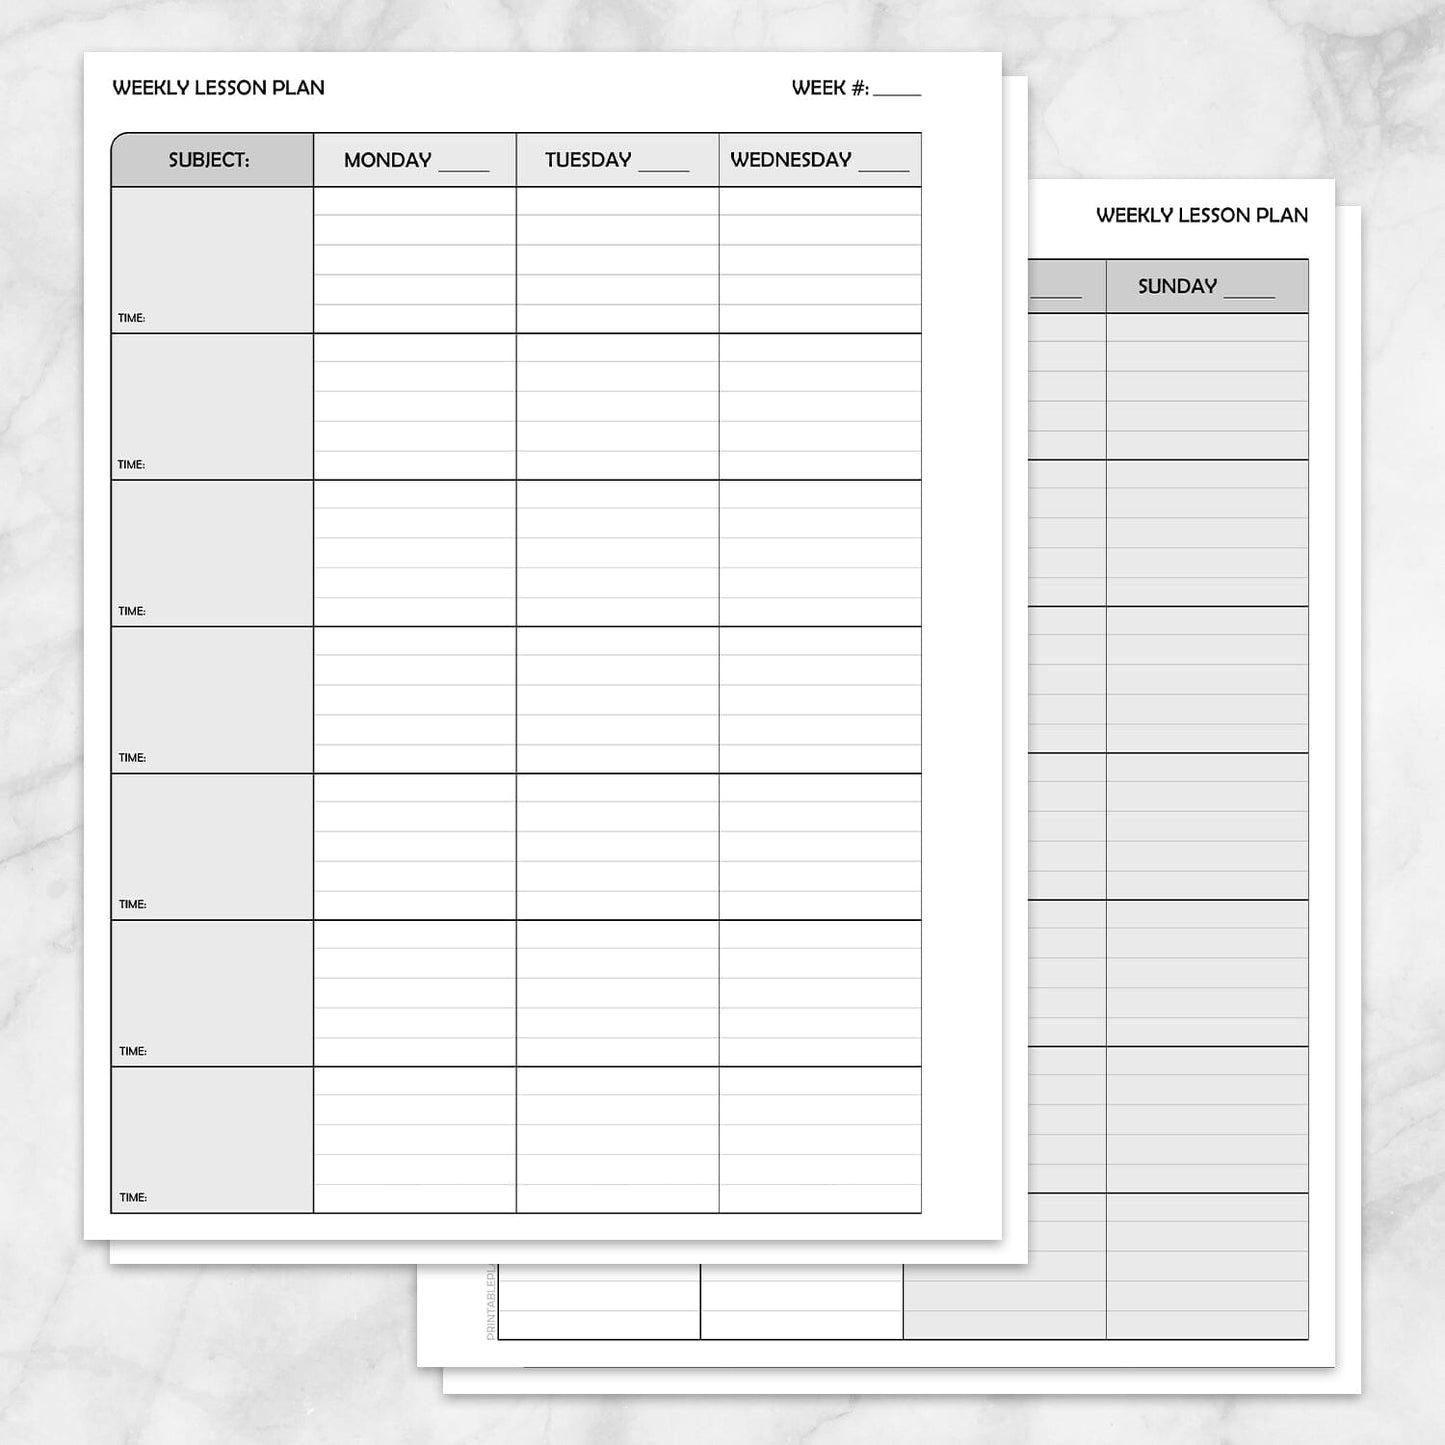 Printable Weekly Lesson Plan for Teachers - School Planning Pages at Printable Planning.